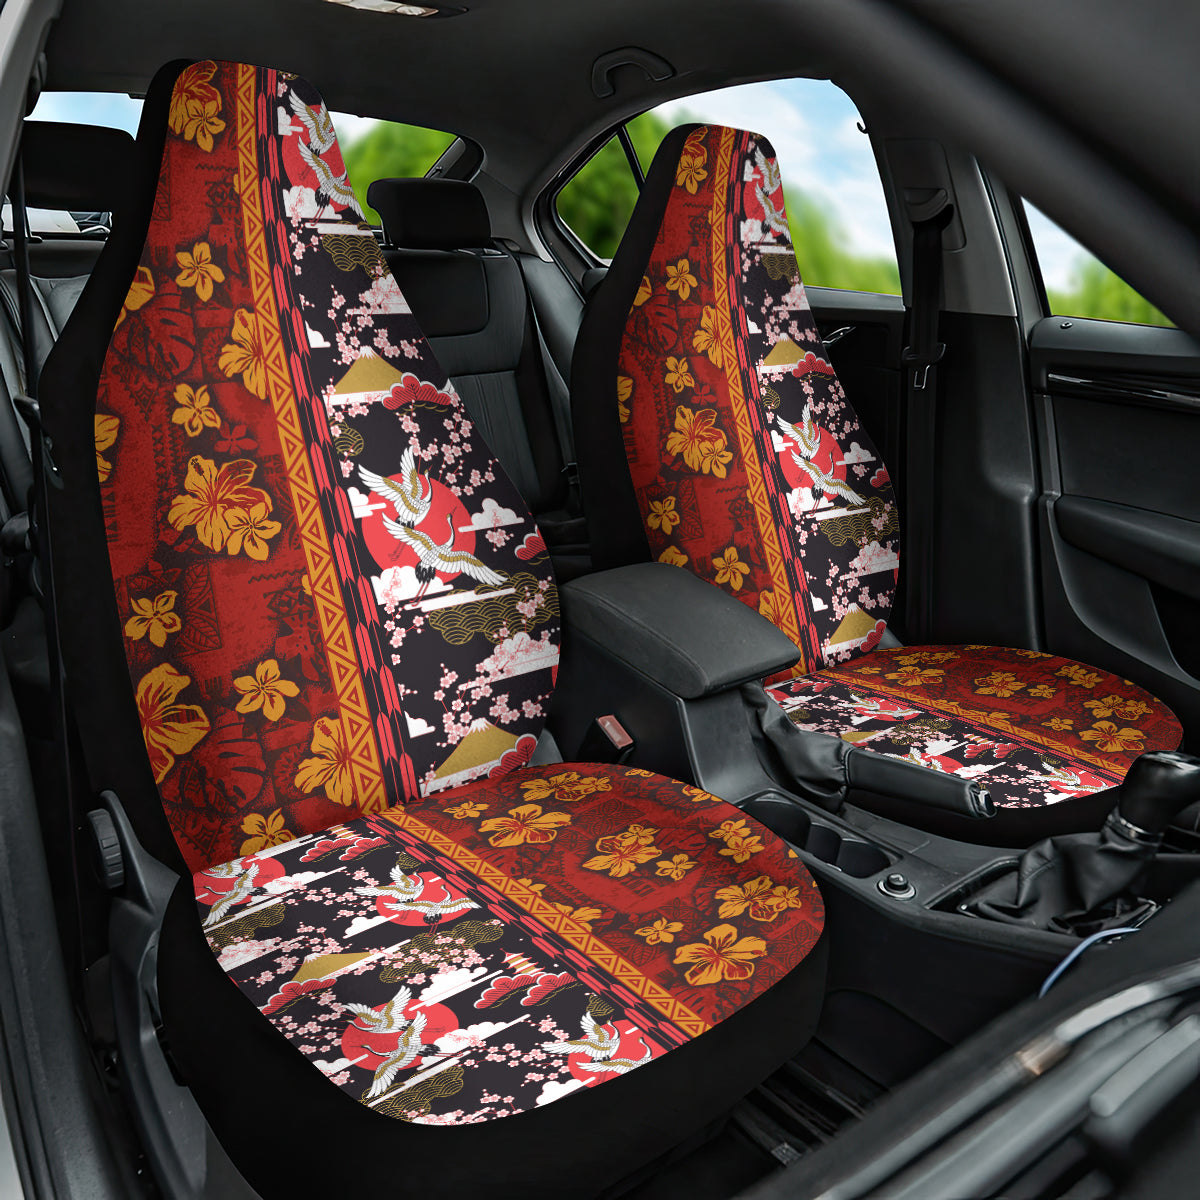 Pan-Pacific Festival Car Seat Cover Hawaiian Tribal and Japanese Pattern Together Culture